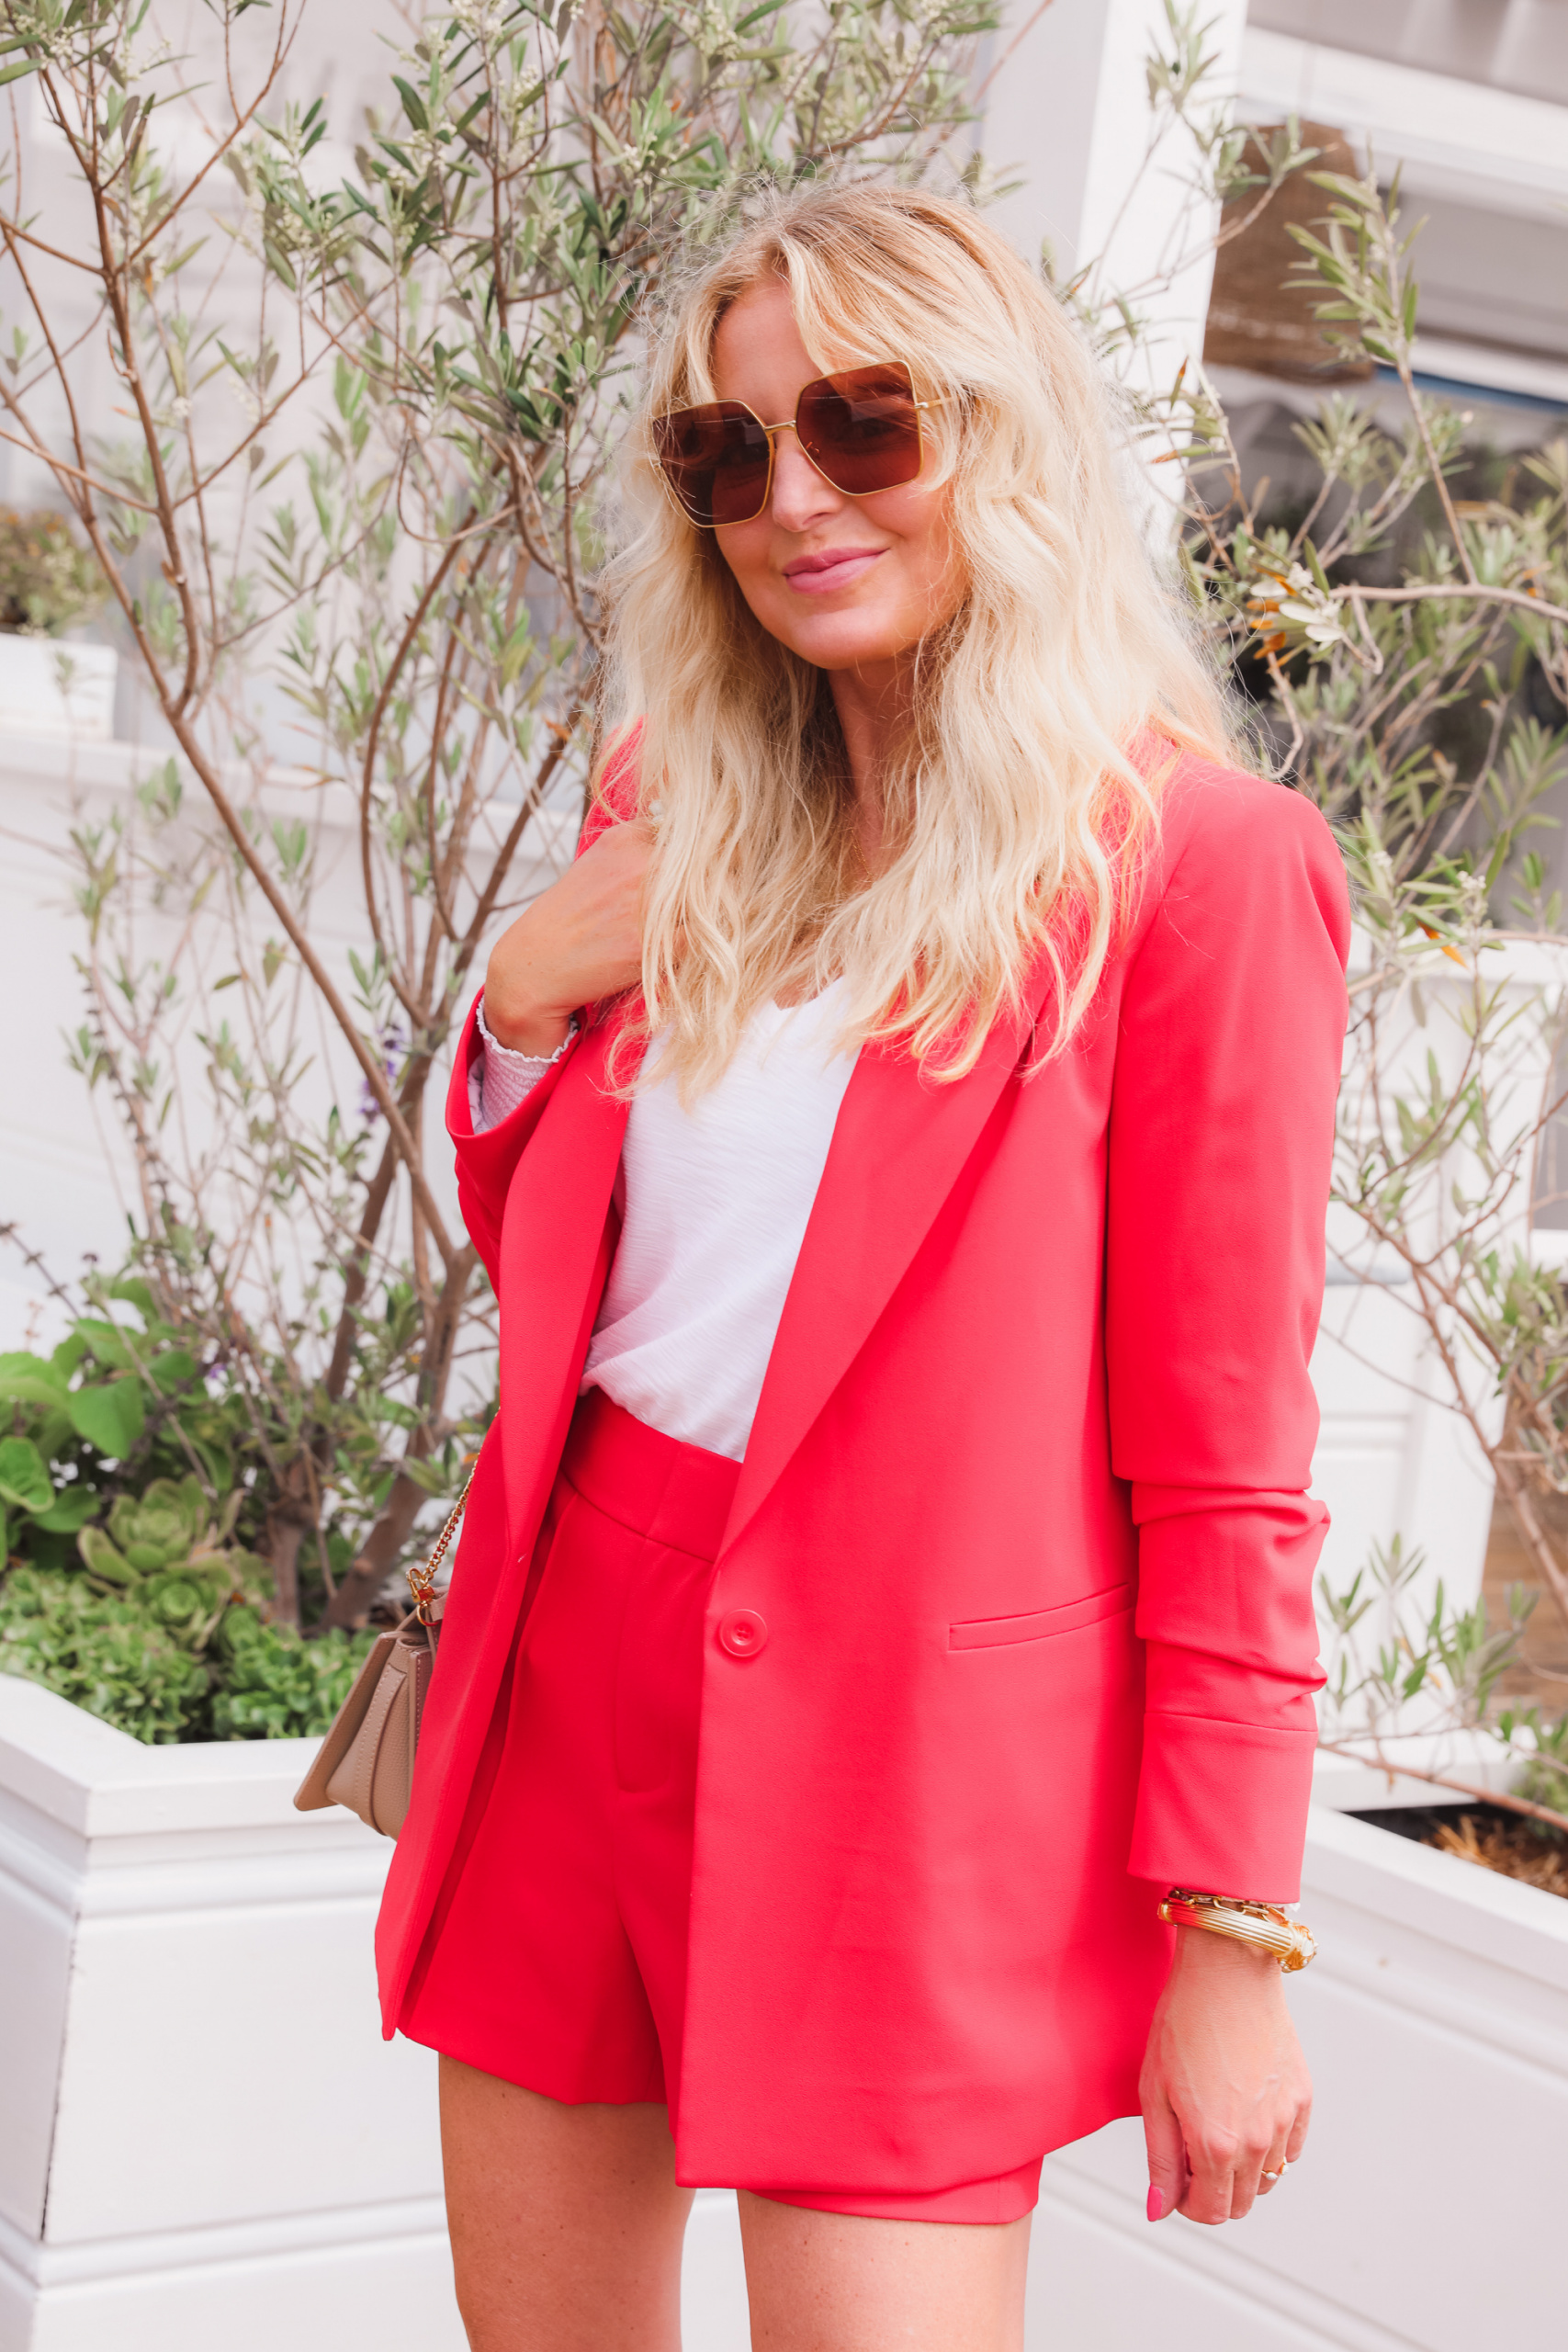 shorts suit in red by Alice + Olivia on fashion over 40 blogger Erin Busbee in Malibu California 